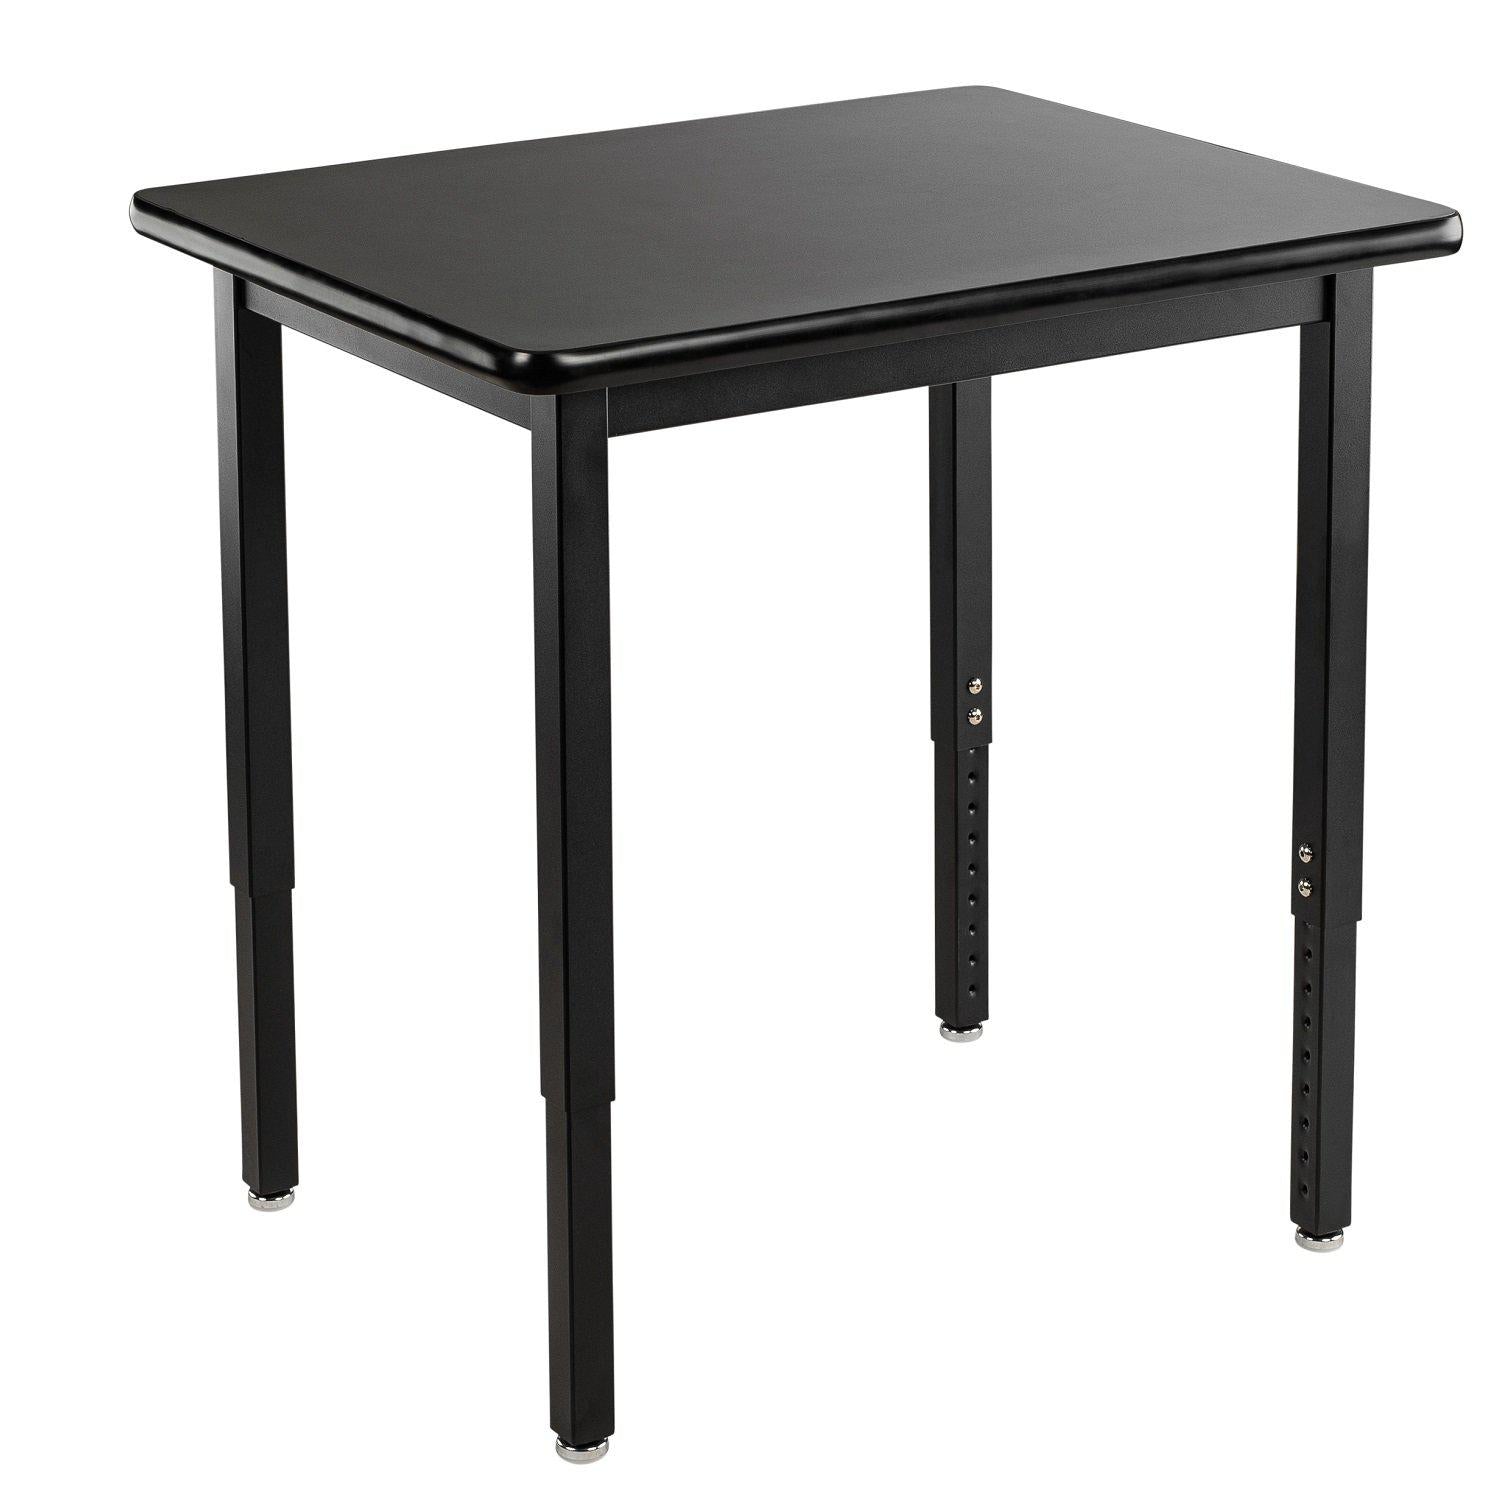 Heavy-Duty Height-Adjustable Utility Table, Black Frame, 36" x 36", High-Pressure Laminate Top with T-Mold Edge